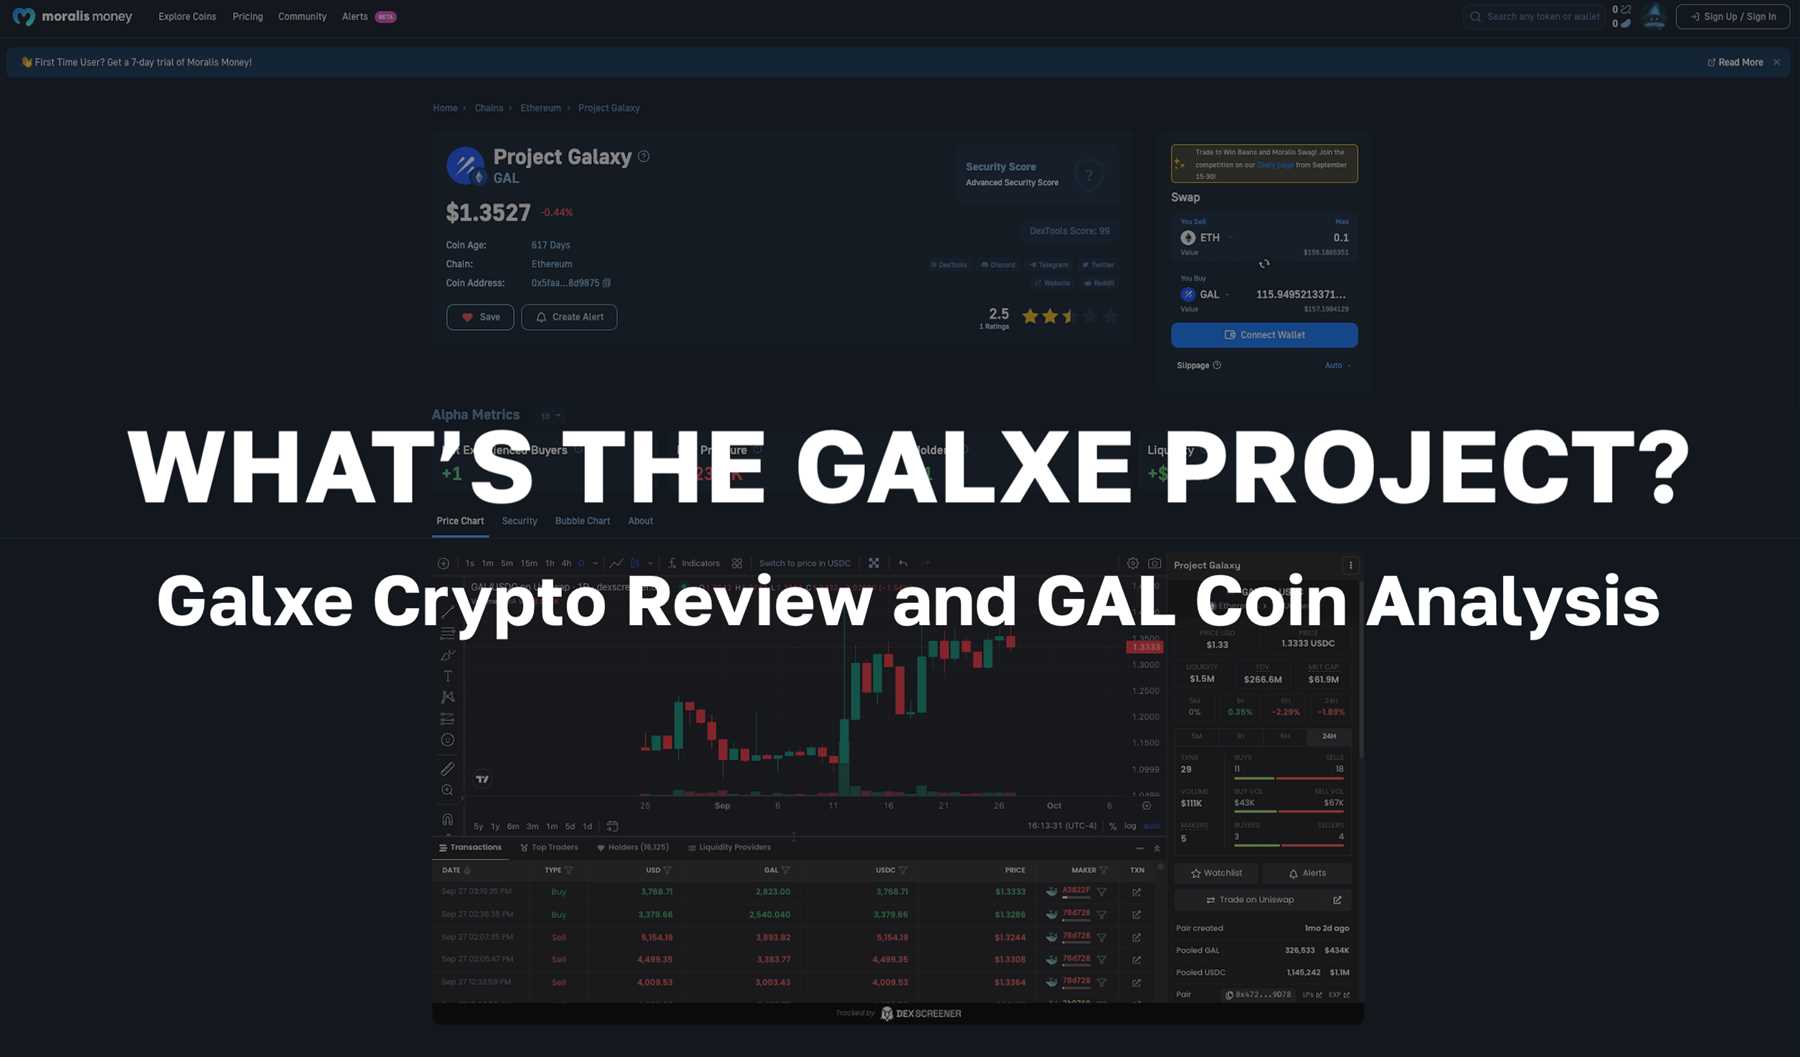 What is Galxe mining?